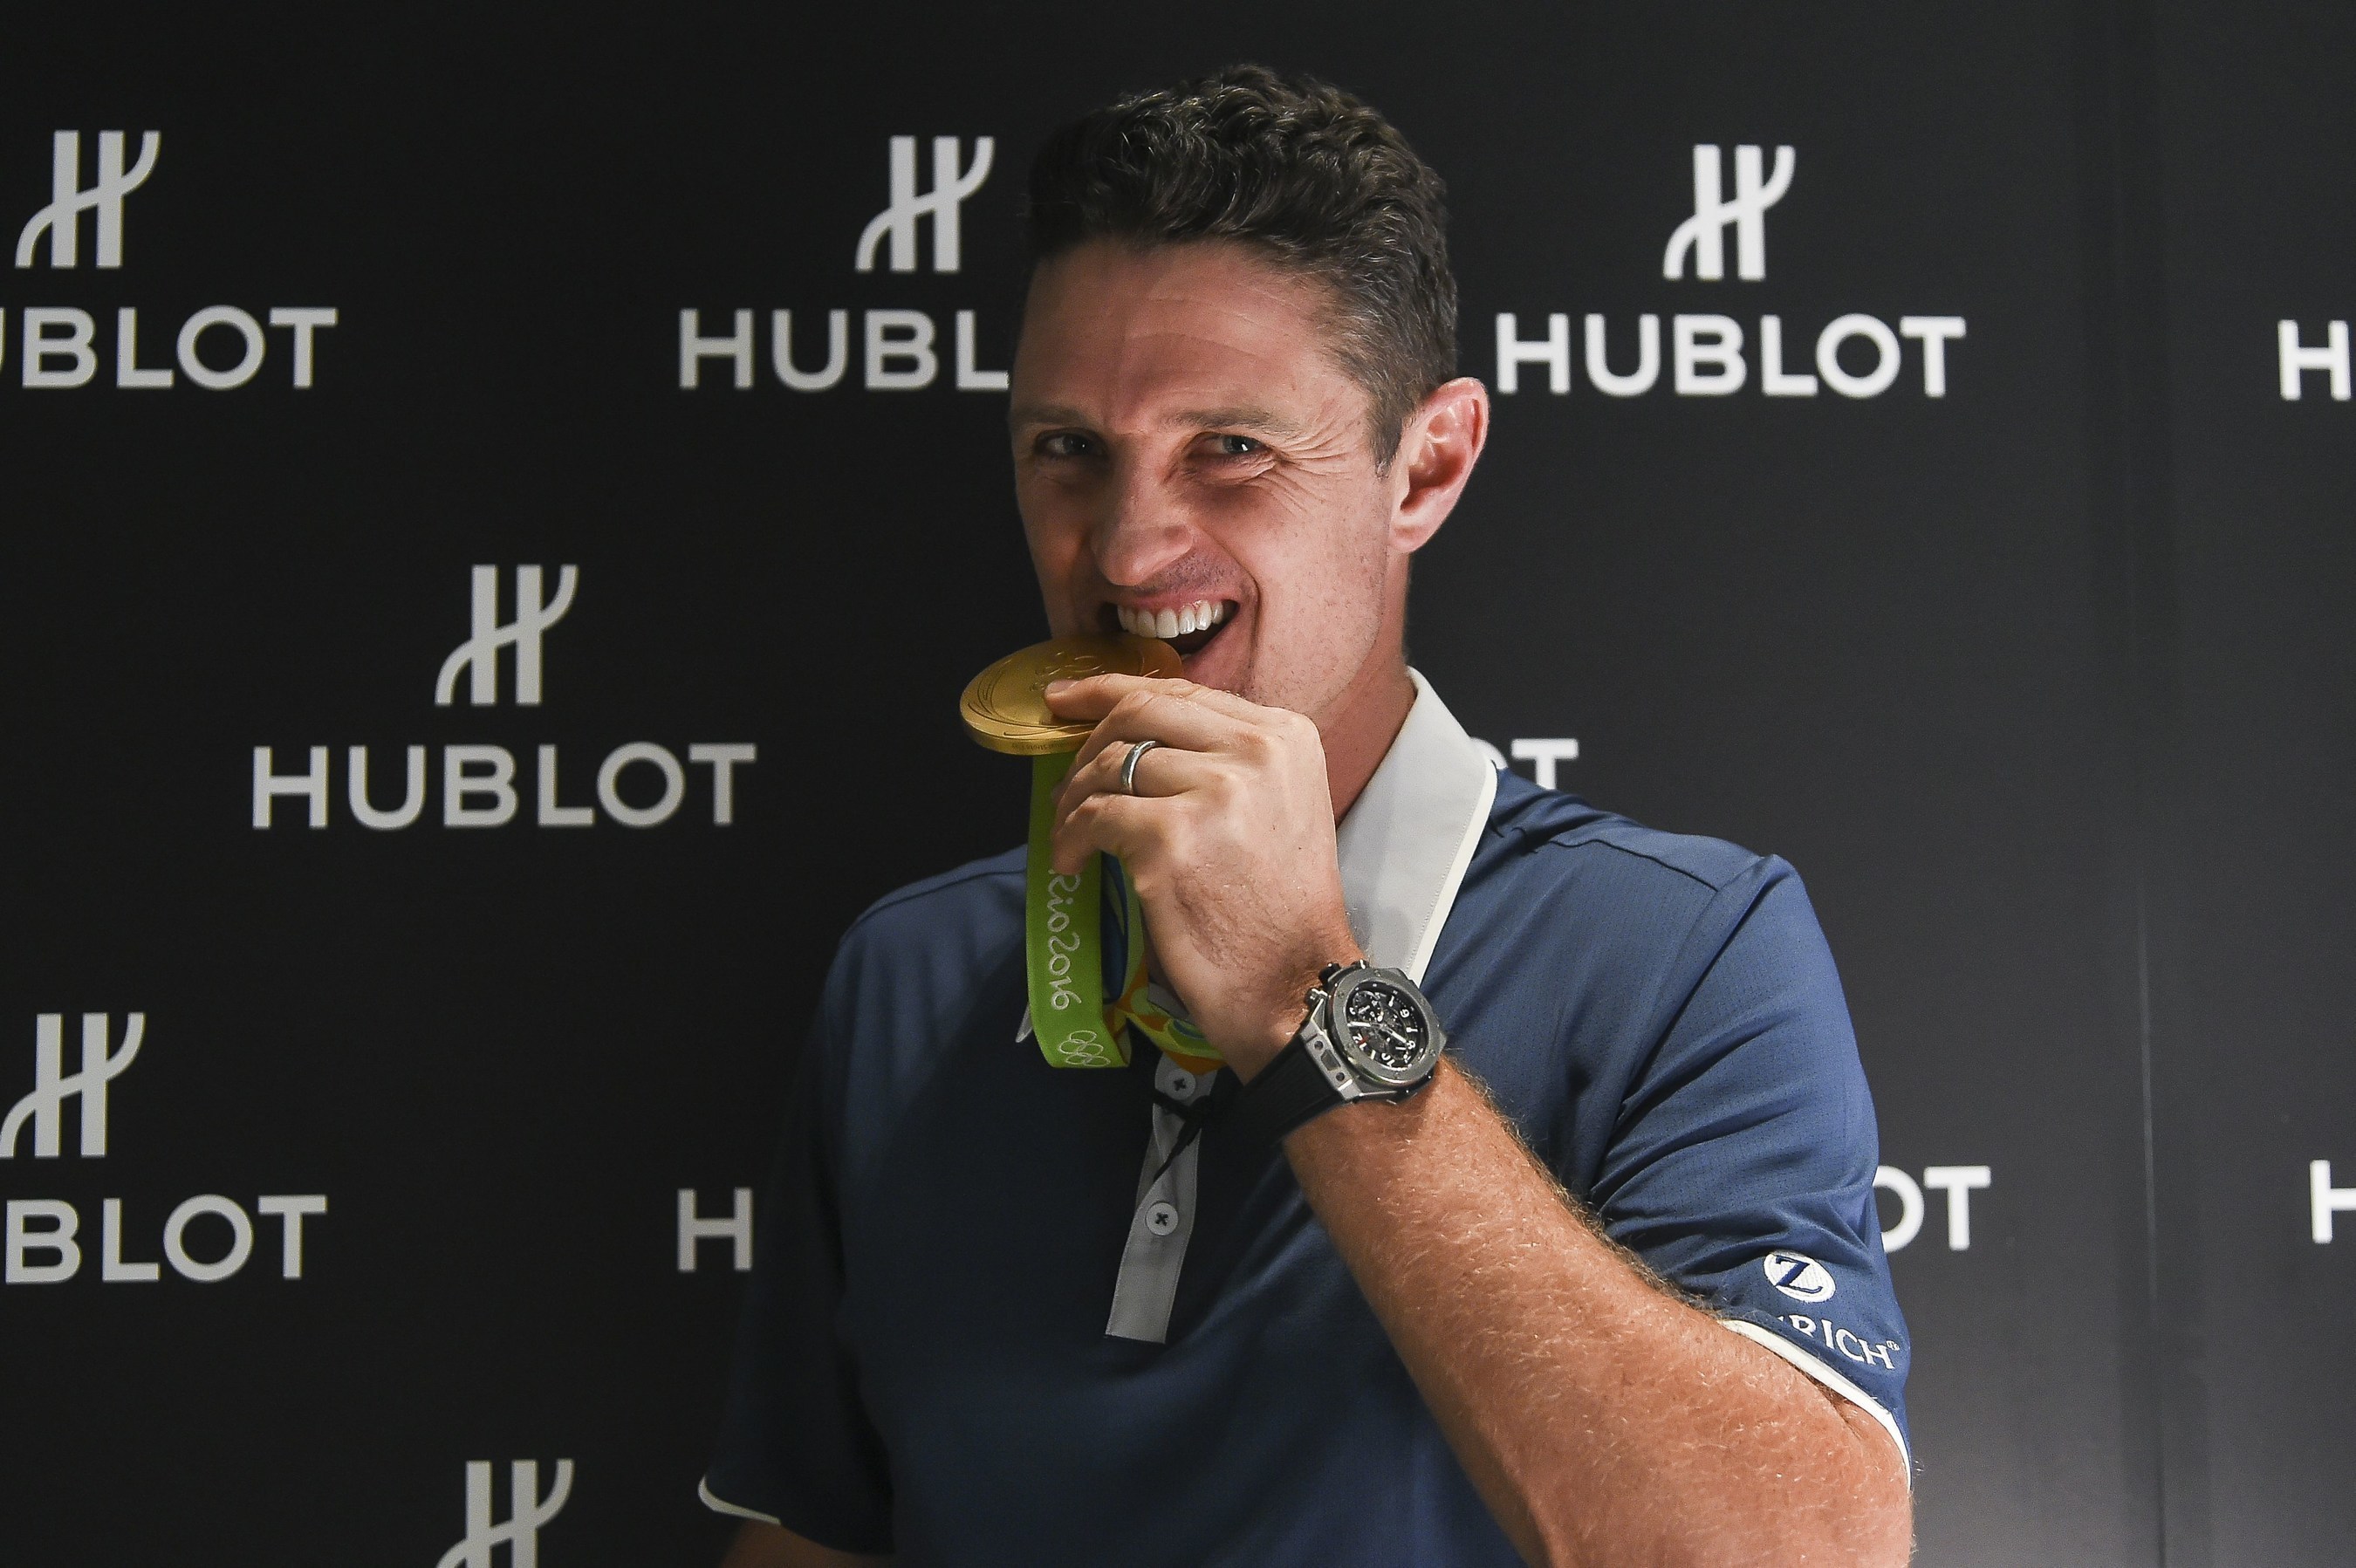 Justin Rose achieved the first Olympic hole in one and is the third Olympic golf champion in history (PRNewsFoto/HUBLOT)